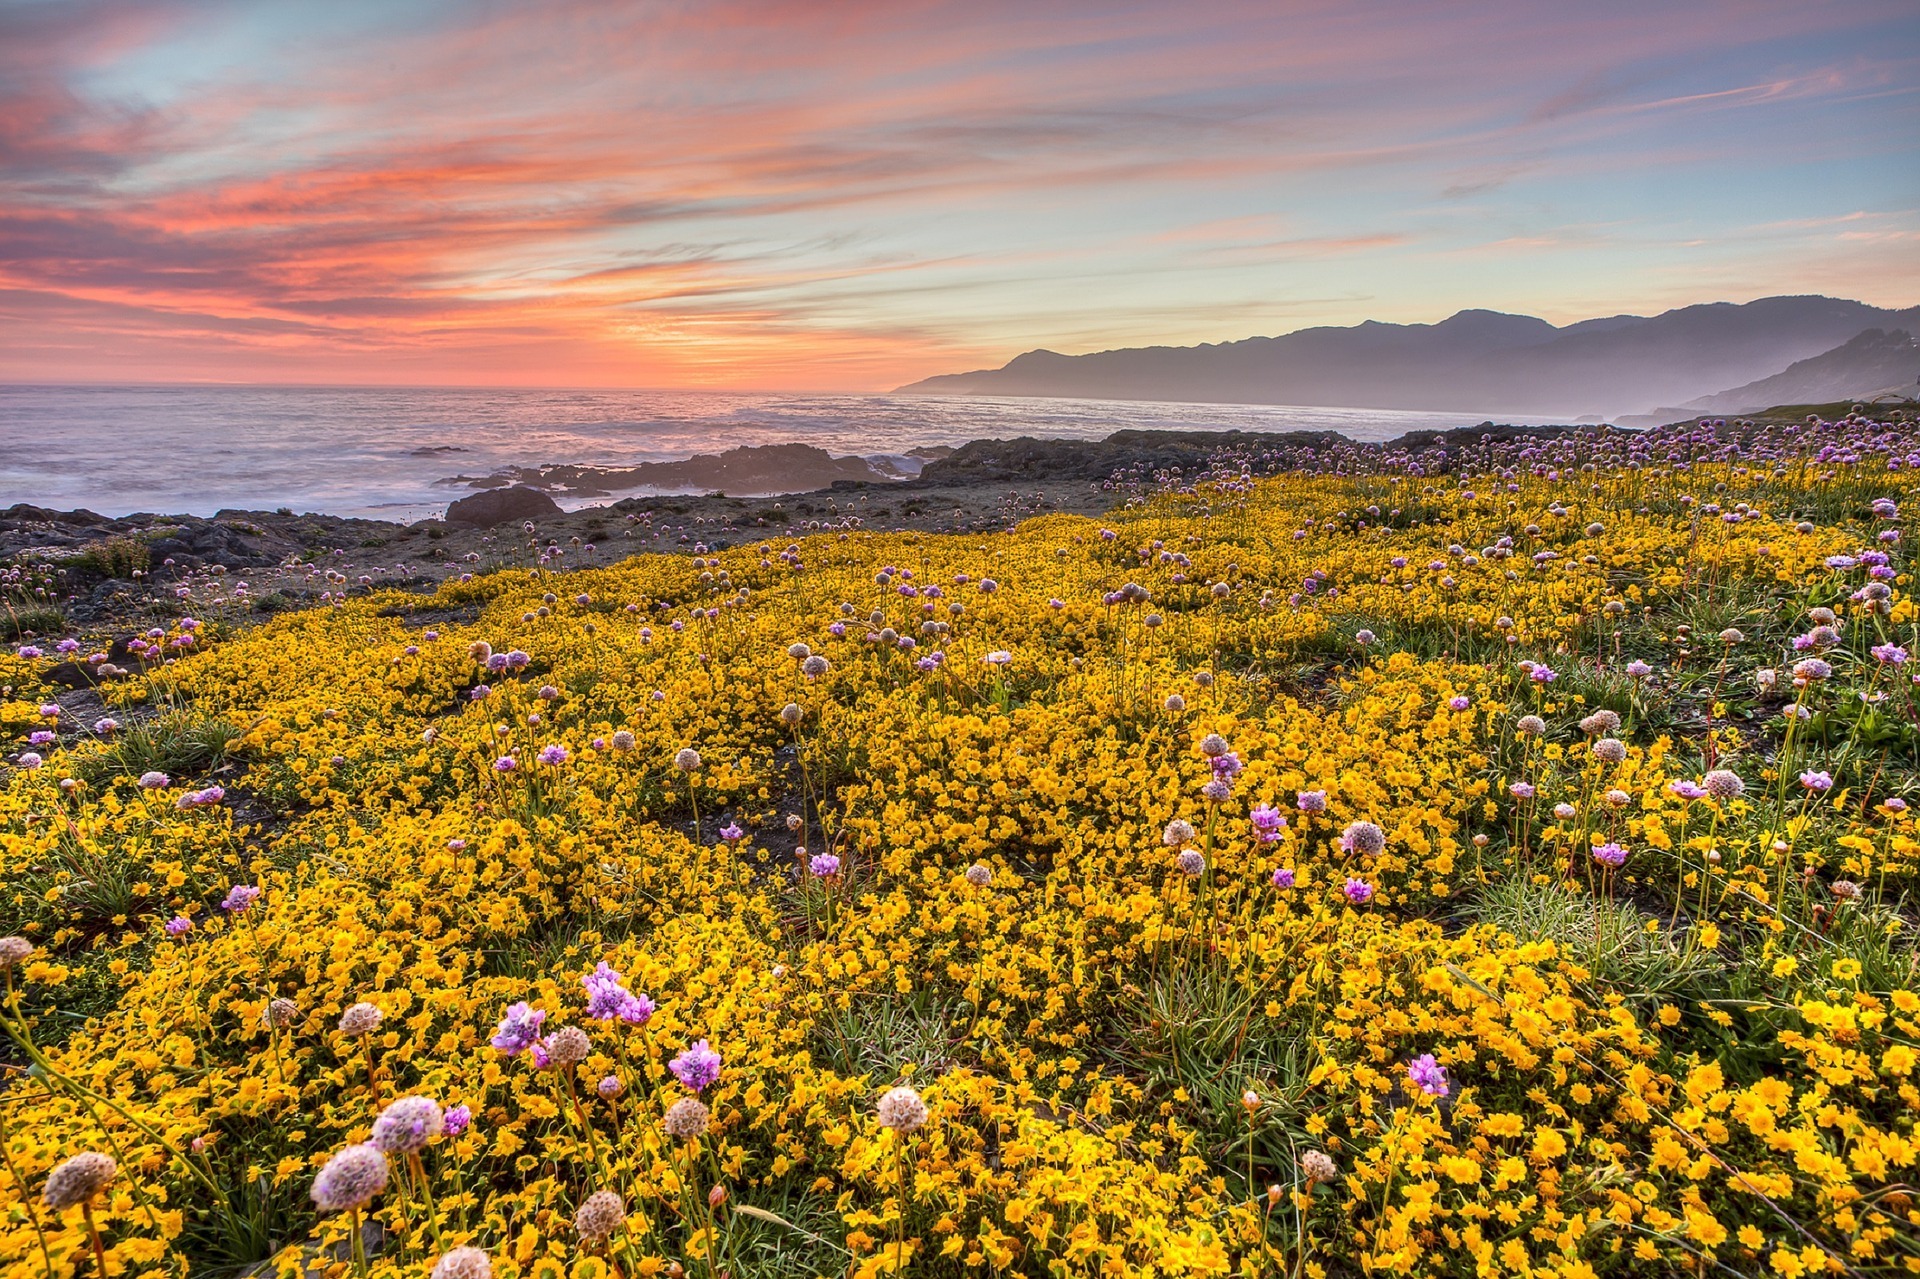 10 spectacular spots for wildflowers